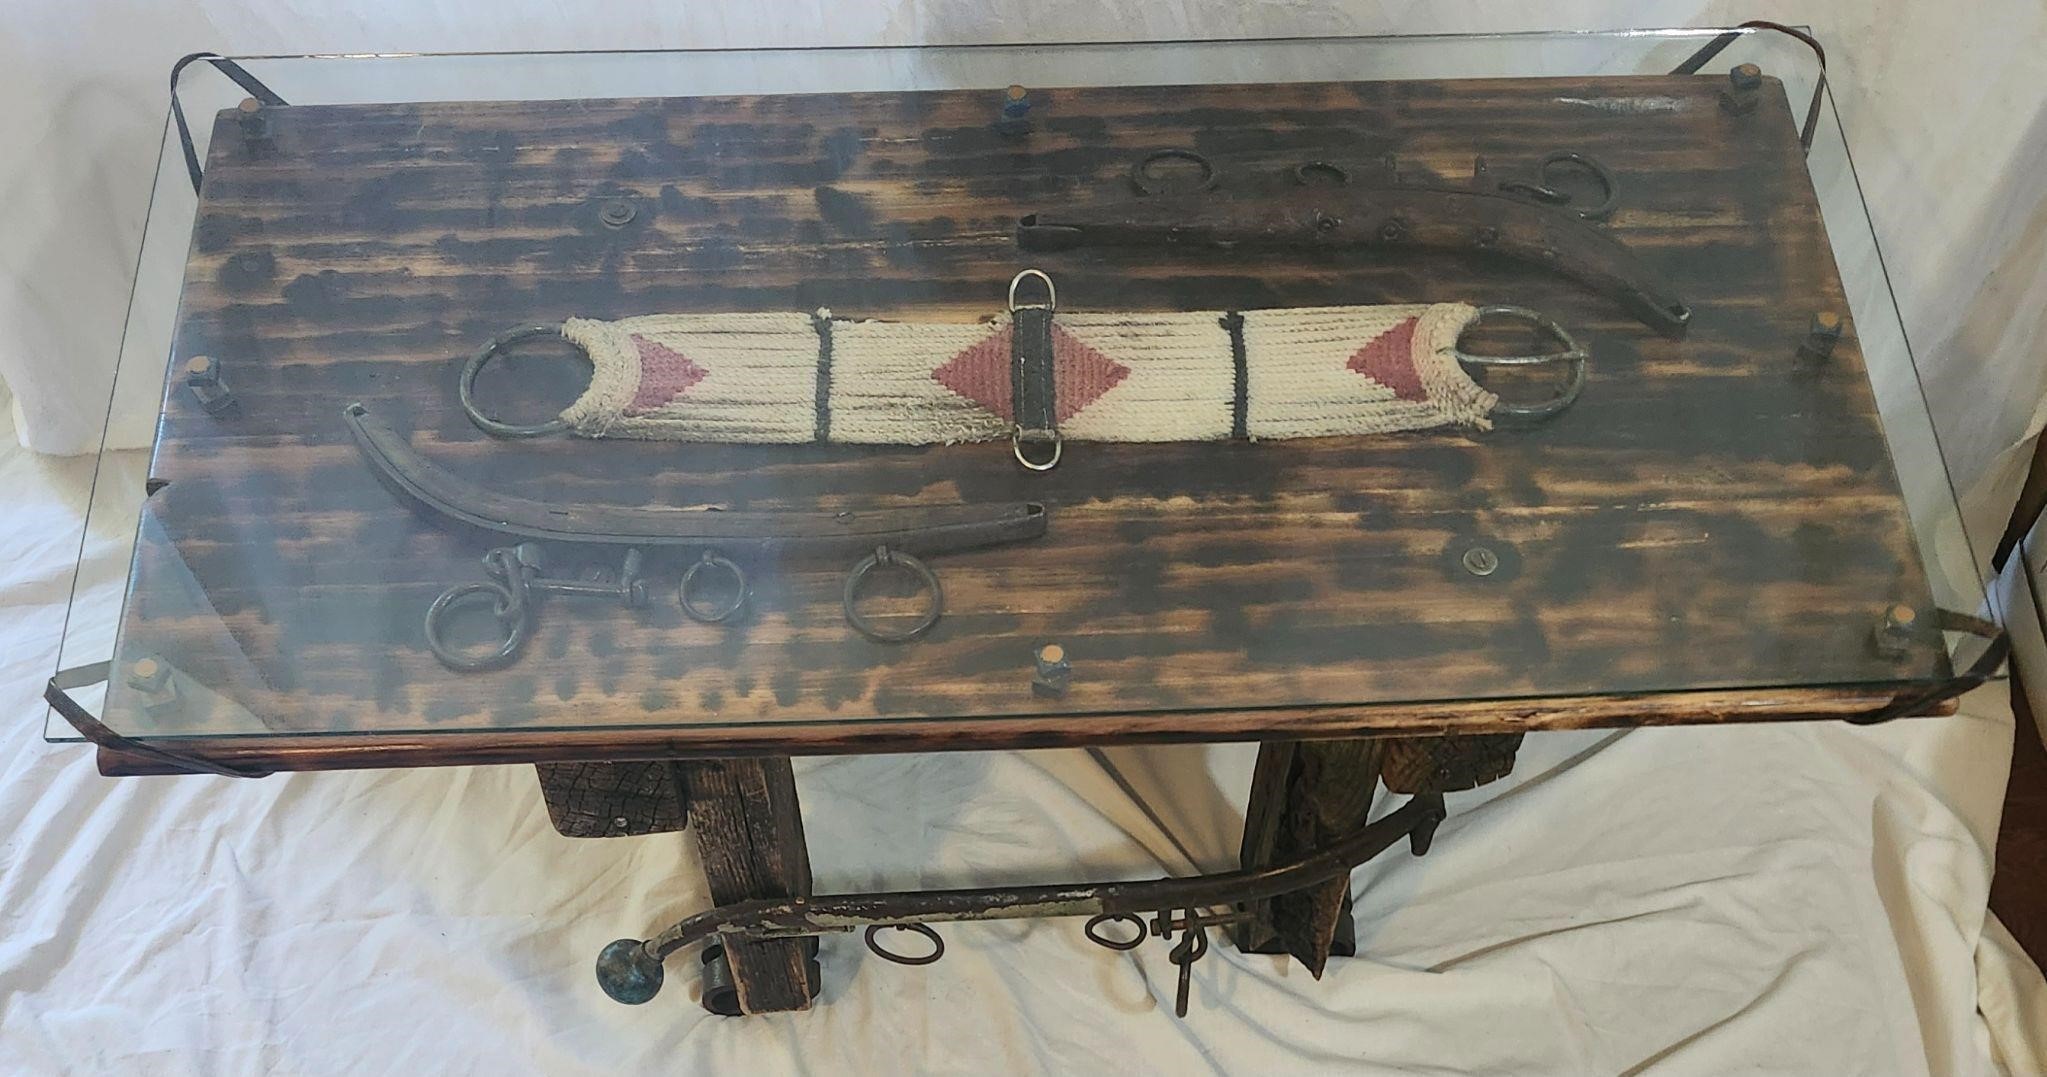 Western antique decor coffee table 22"×48"×24.5"